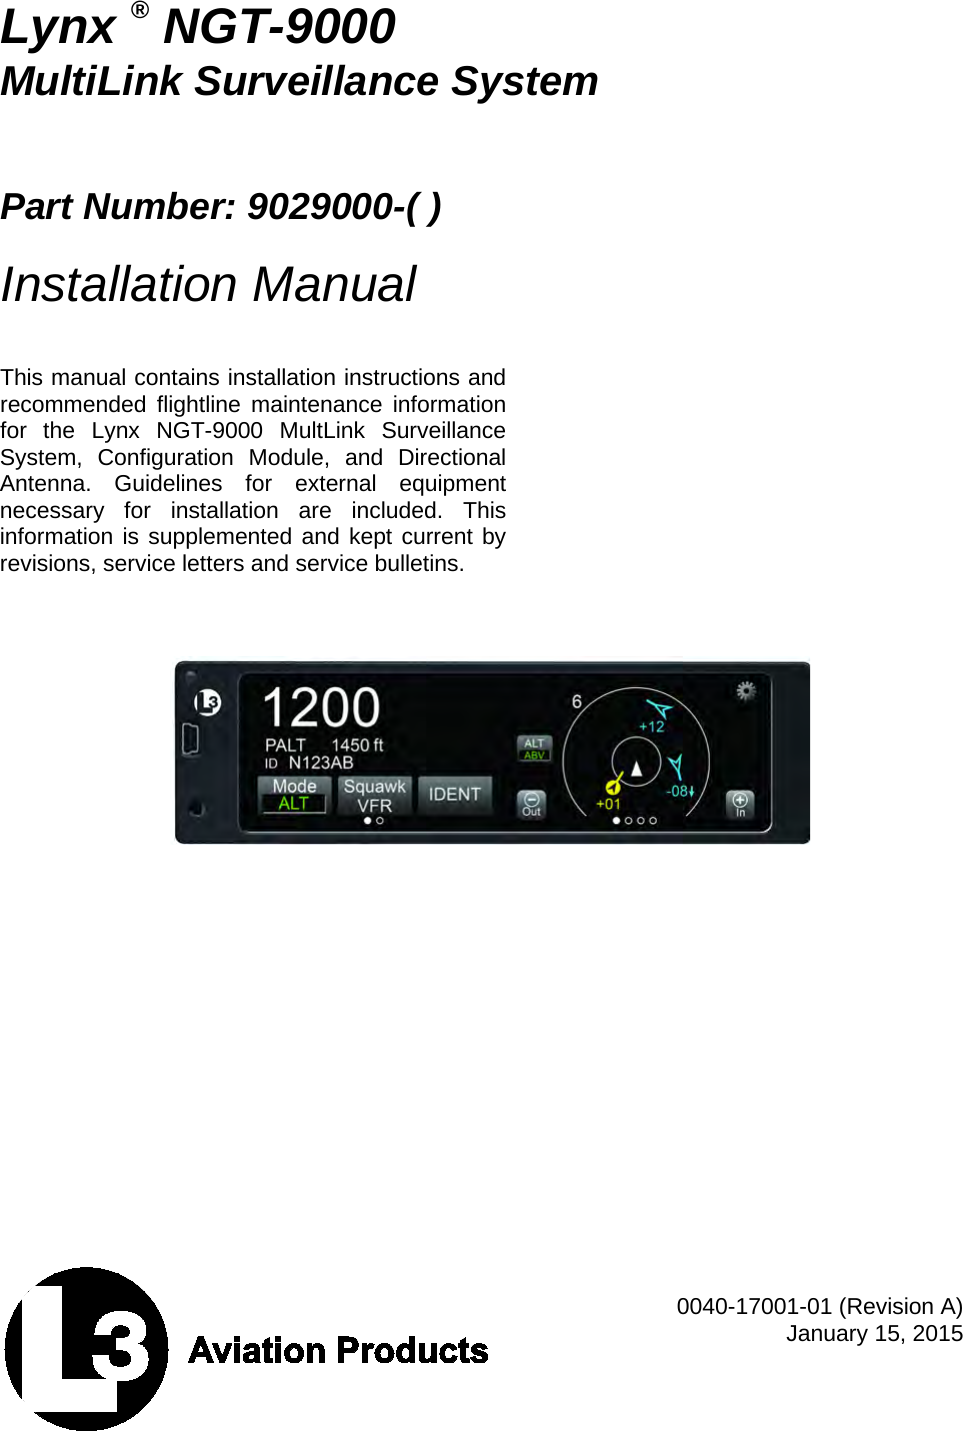     Lynx ® NGT-9000 MultiLink Surveillance System    Part Number: 9029000-( )  Installation Manual   This manual contains installation instructions and recommended flightline maintenance information for the Lynx  NGT-9000 MultLink Surveillance System, Configuration Module, and Directional Antenna. Guidelines for external equipment necessary for installation are included. This information is supplemented and kept current by revisions, service letters and service bulletins.         0040-17001-01 (Revision A) January 15, 2015  